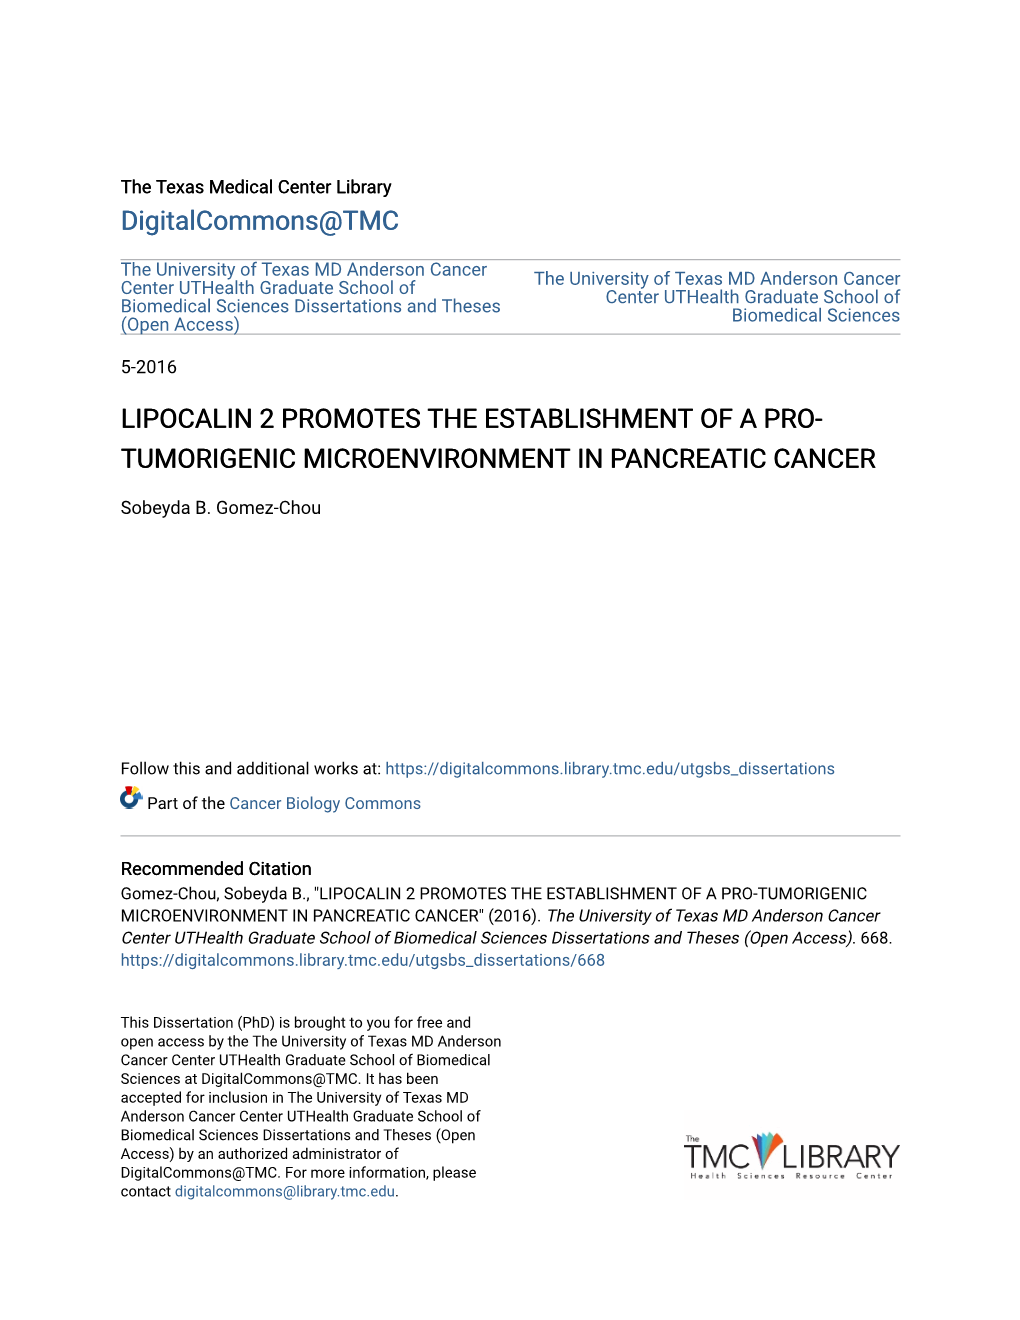 Lipocalin 2 Promotes the Establishment of a Pro-Tumorigenic Microenvironment in Pancreatic Cancer" (2016)